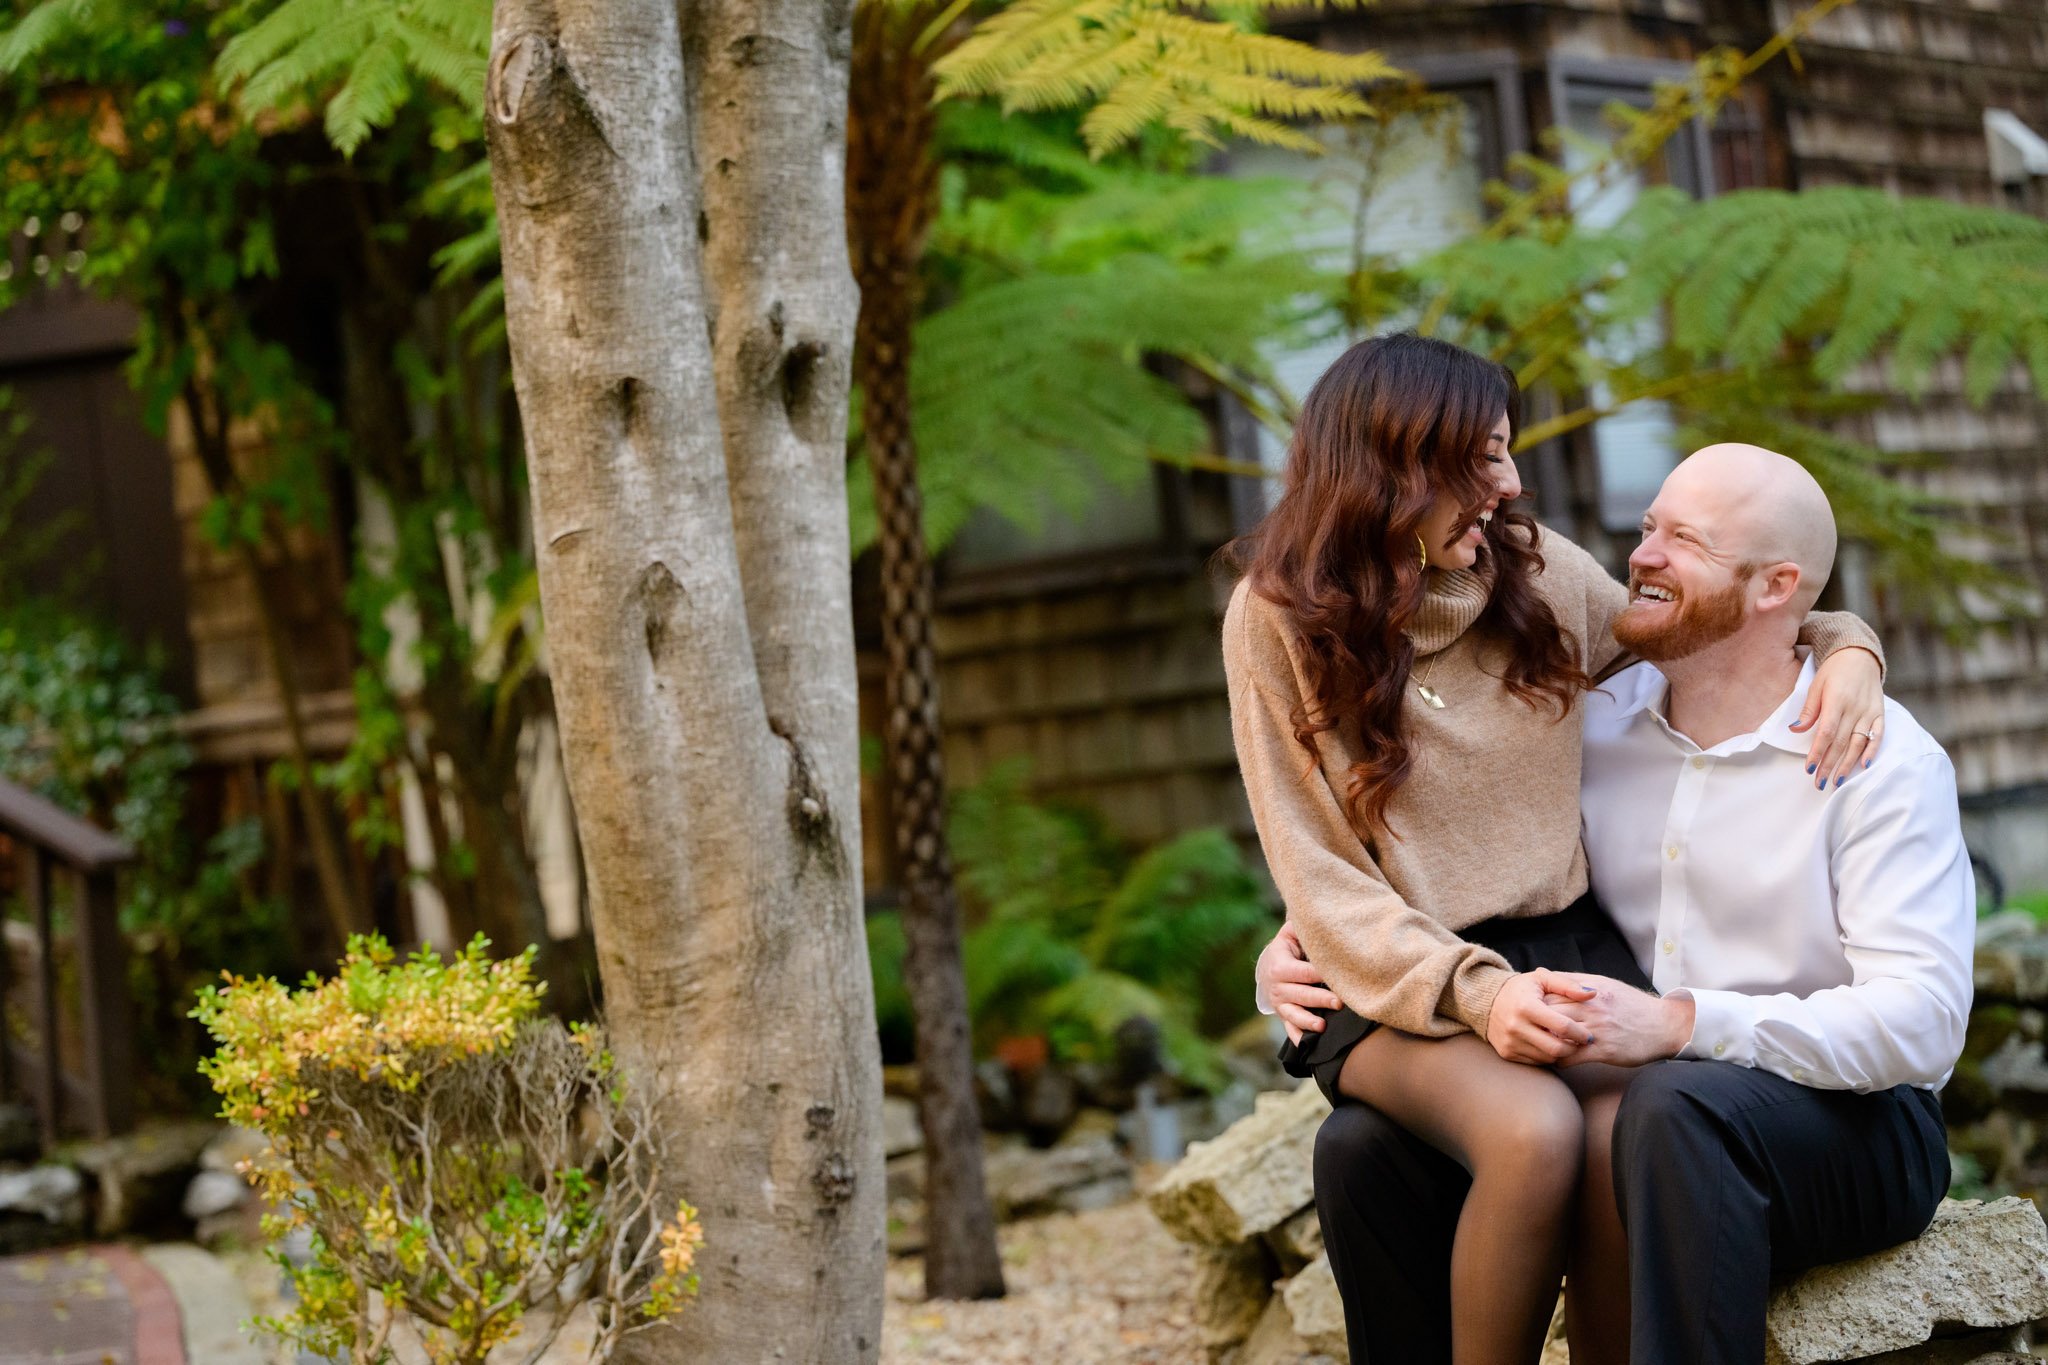 Z9A_3717_Victor_and_Colie_Santa_Cruz_Marriage_Proposal_Photography.jpg